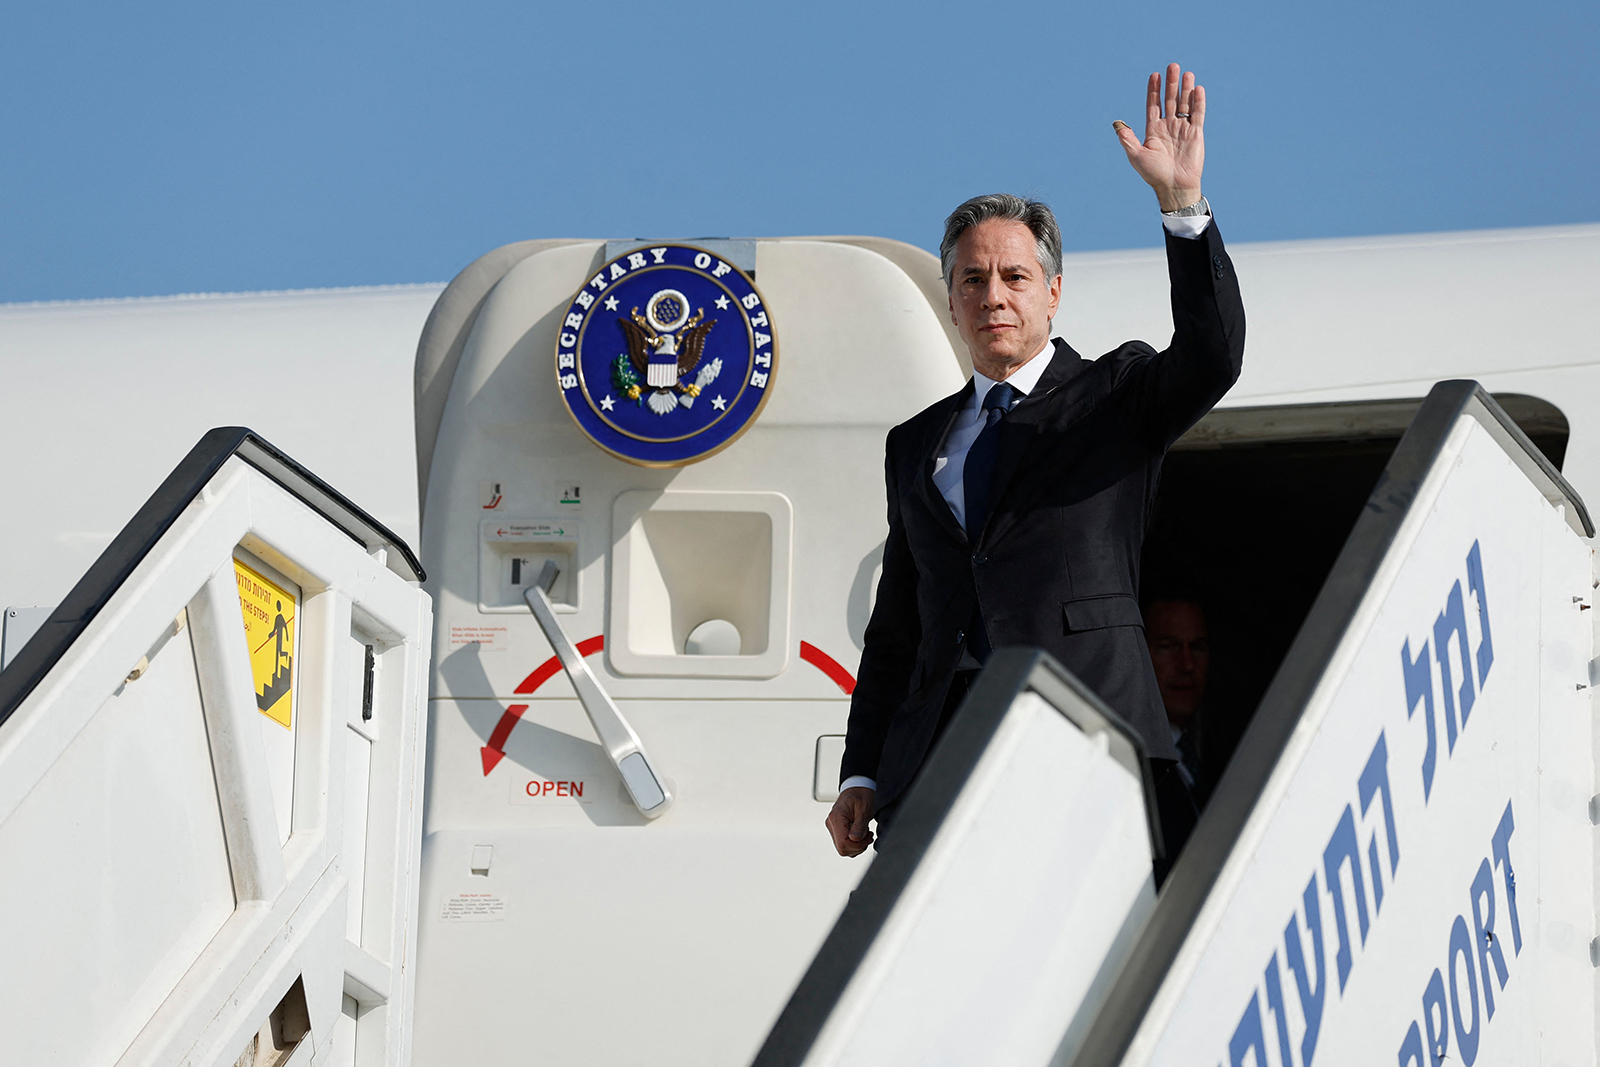 Antony Blinken waves as he disembarks from an aircraft for the start of his visit to Israel at Ben Gurion International airport near Tel Aviv on November 3.